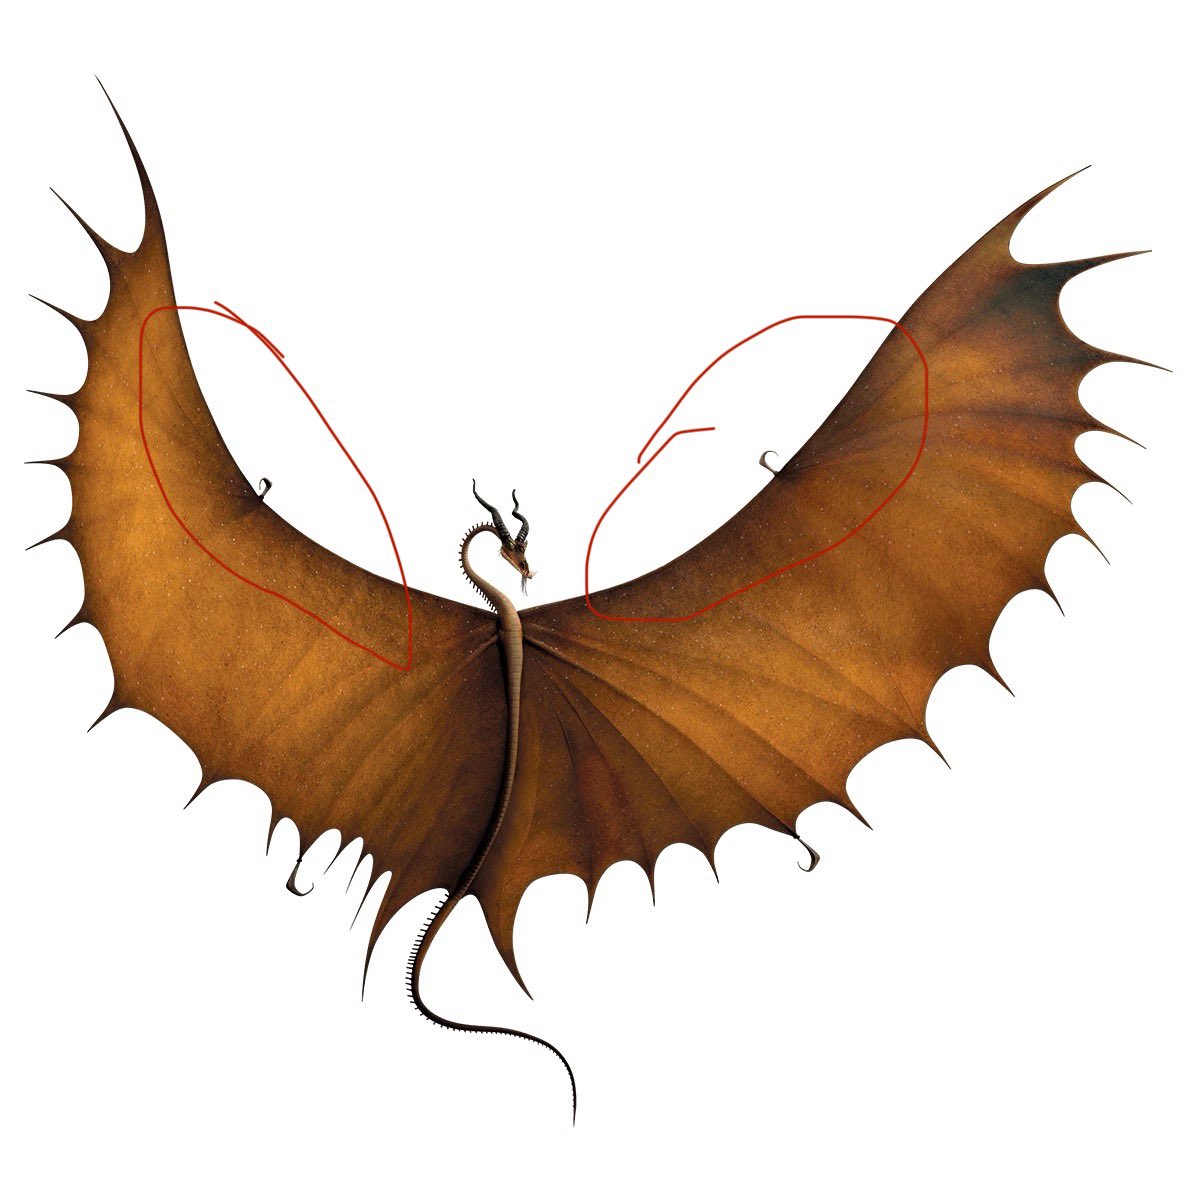 @JTellegen @JTellegen I have a #DT9R question about Buzzsaw’s dragon.  What I’ve noticed is that Jack has serrated edges on the front of his wings—which is NOT seen in other Timberjacks.  Is Jack be a newly-evolved subspecies?  If so, perhaps we could call him the Saw-winged Timberjack.